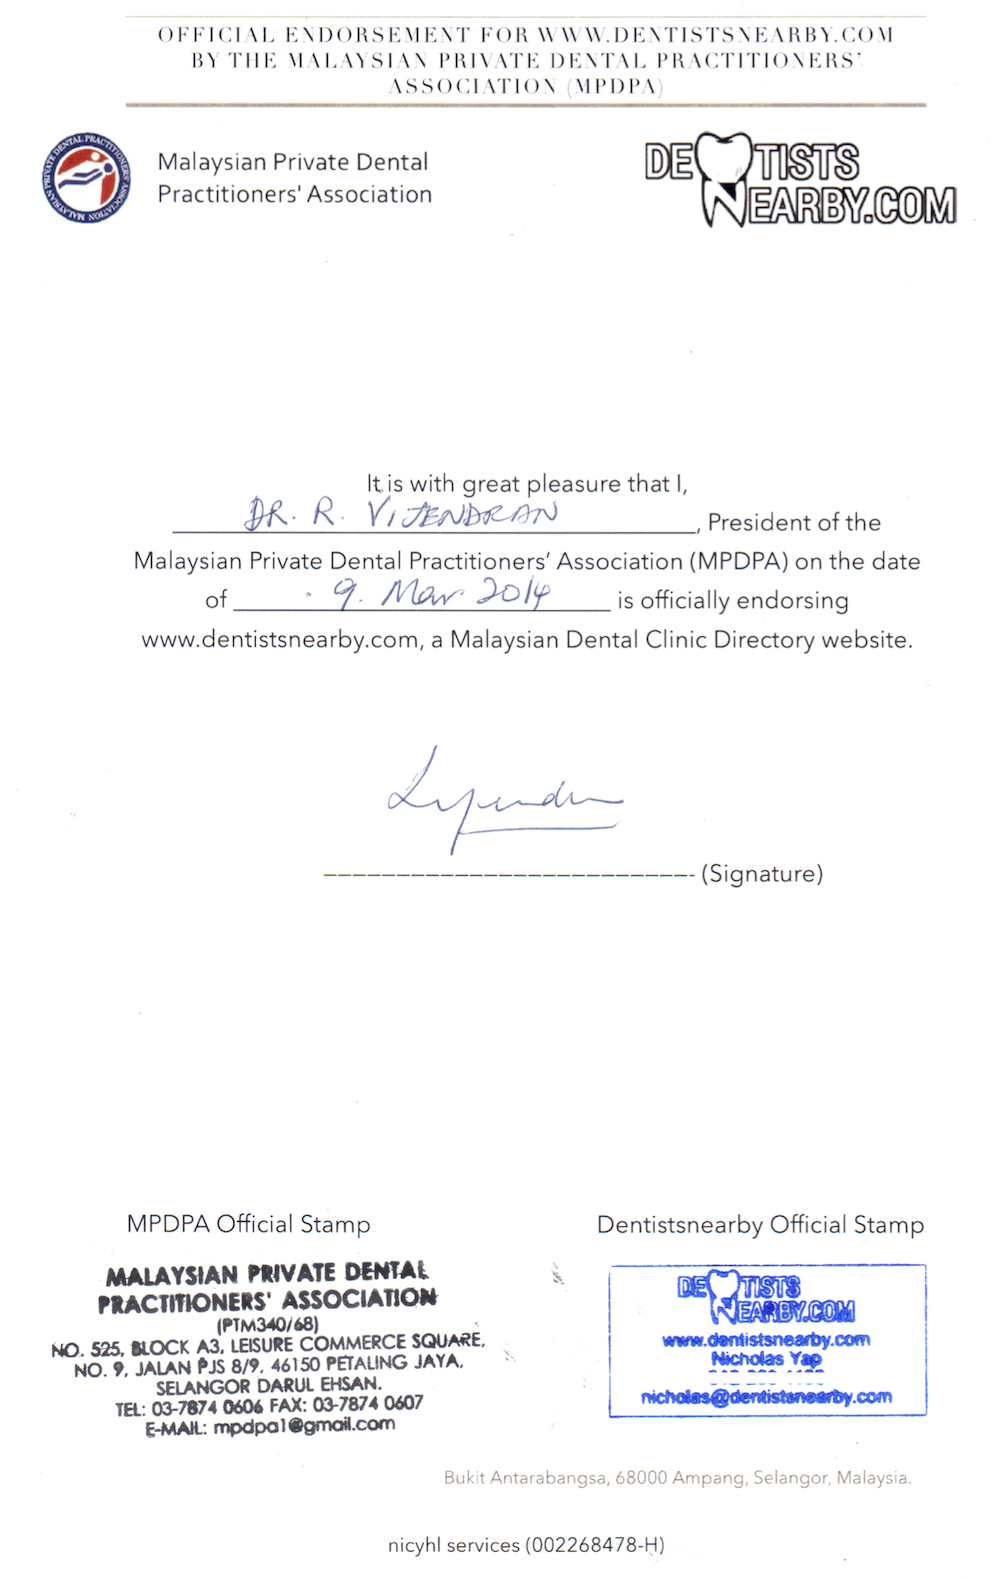 Scan-copy-of-mpdpa-dentistsnearby-endorsement